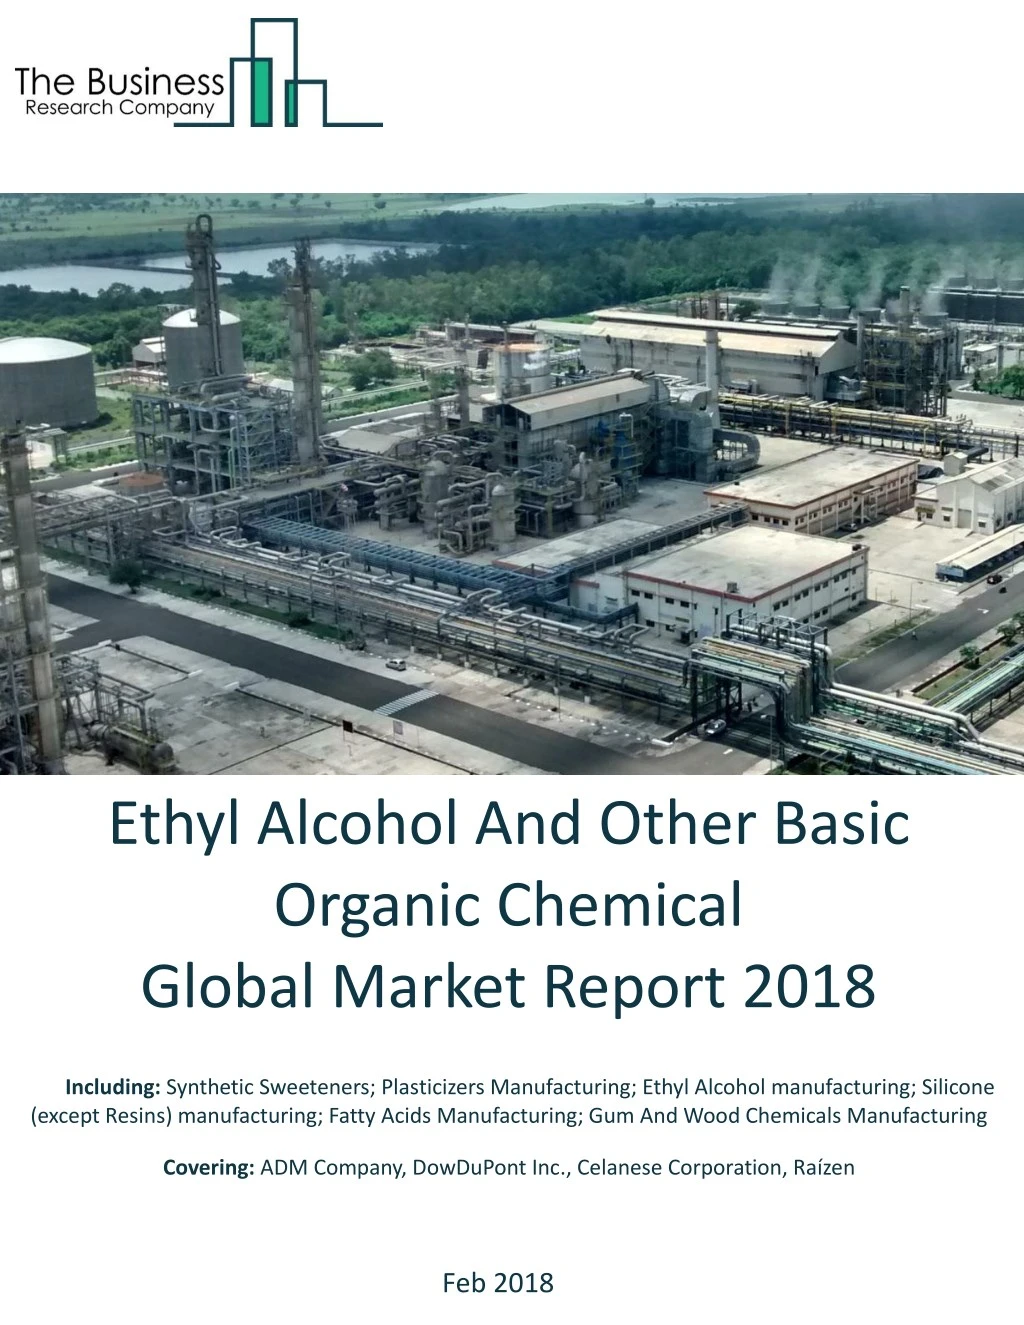 ethyl alcohol and other basic organic chemical